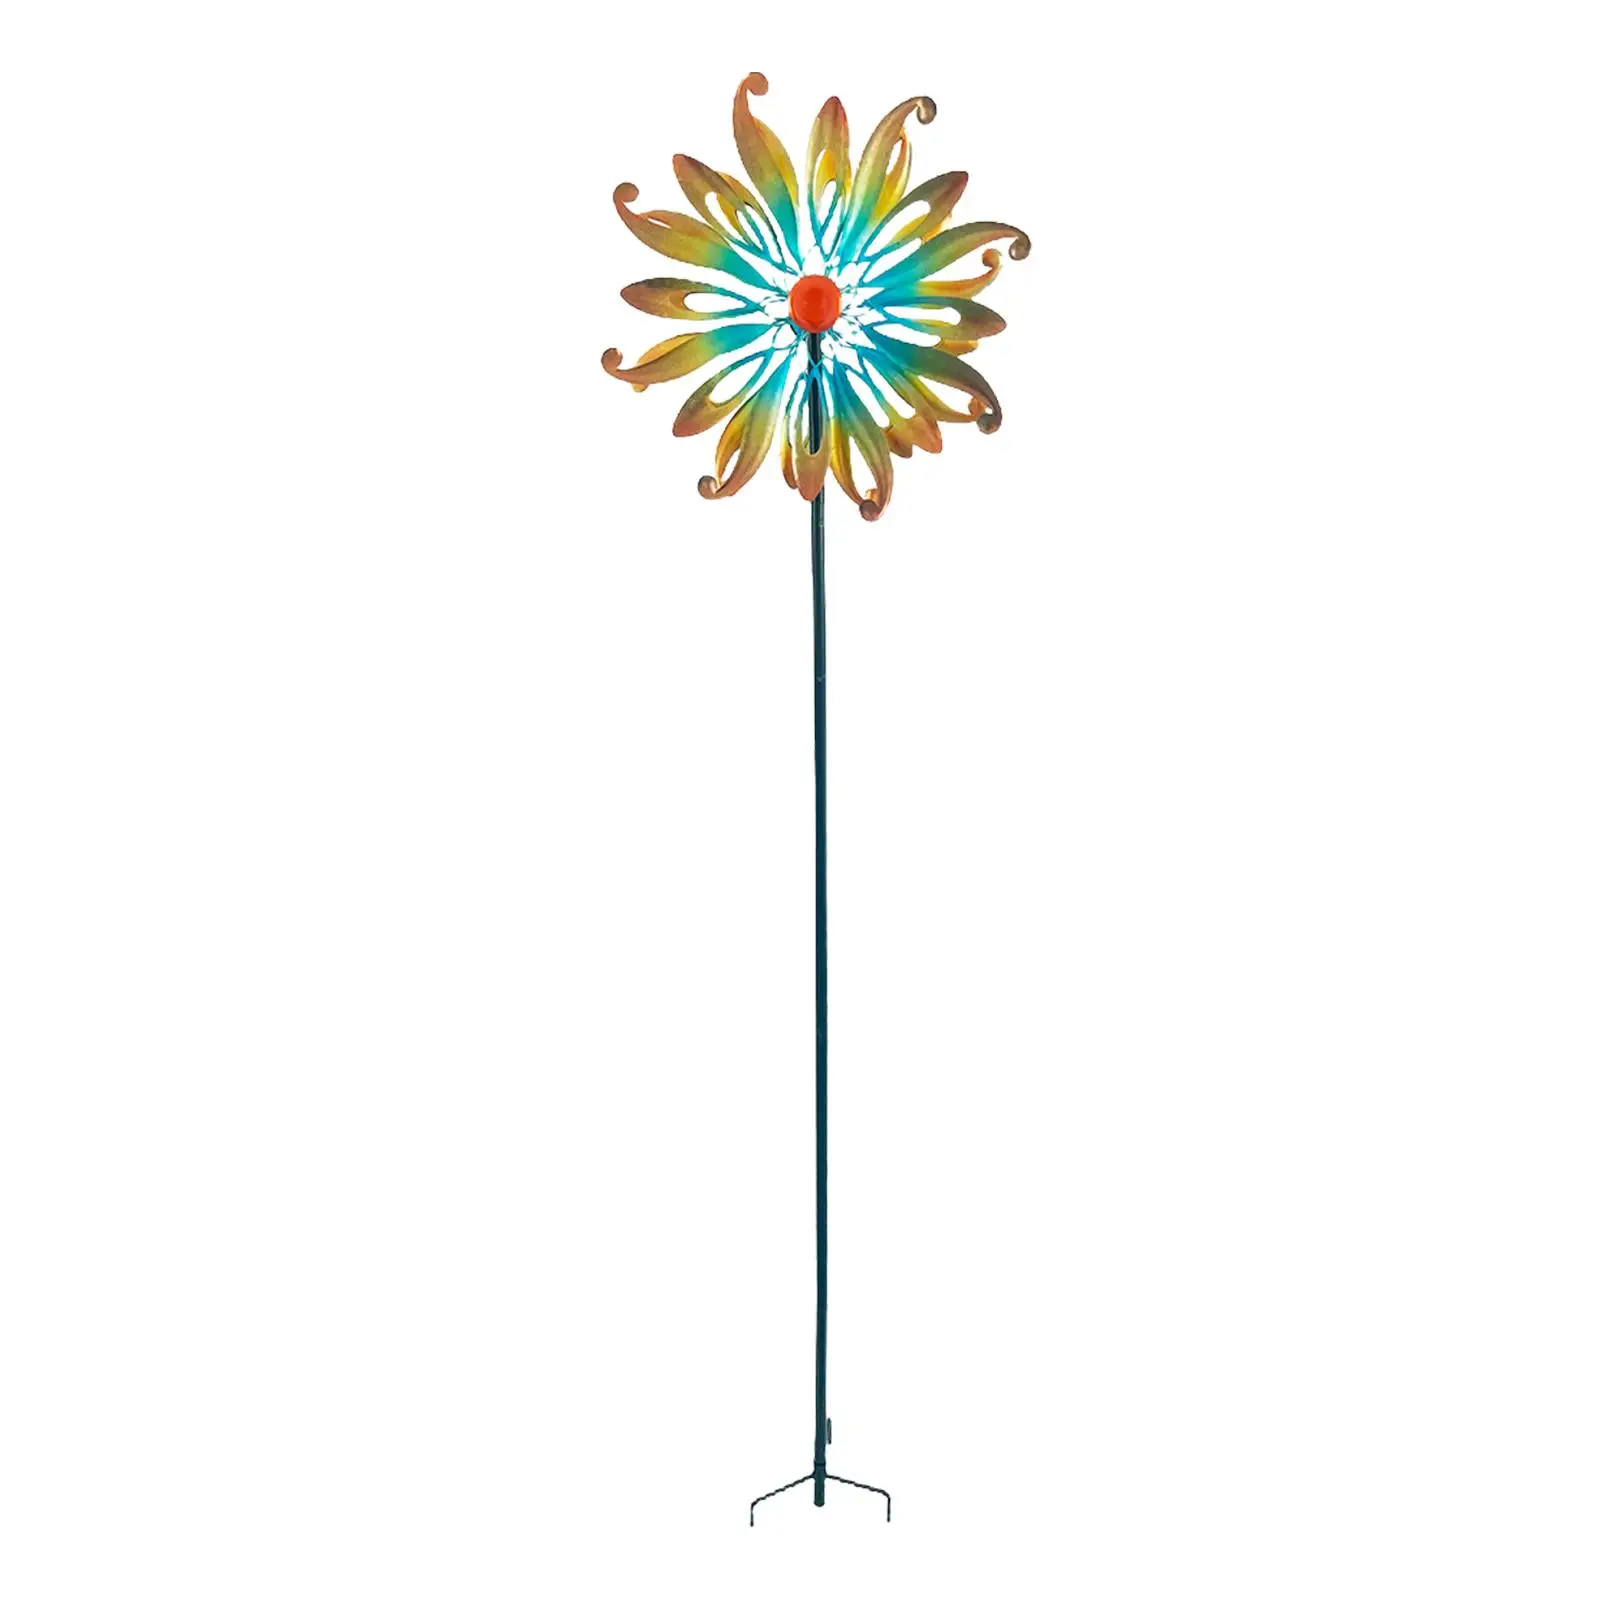 71 Inches Wind Colorful Stake Weatherproof Windmill for Garden Outdoor